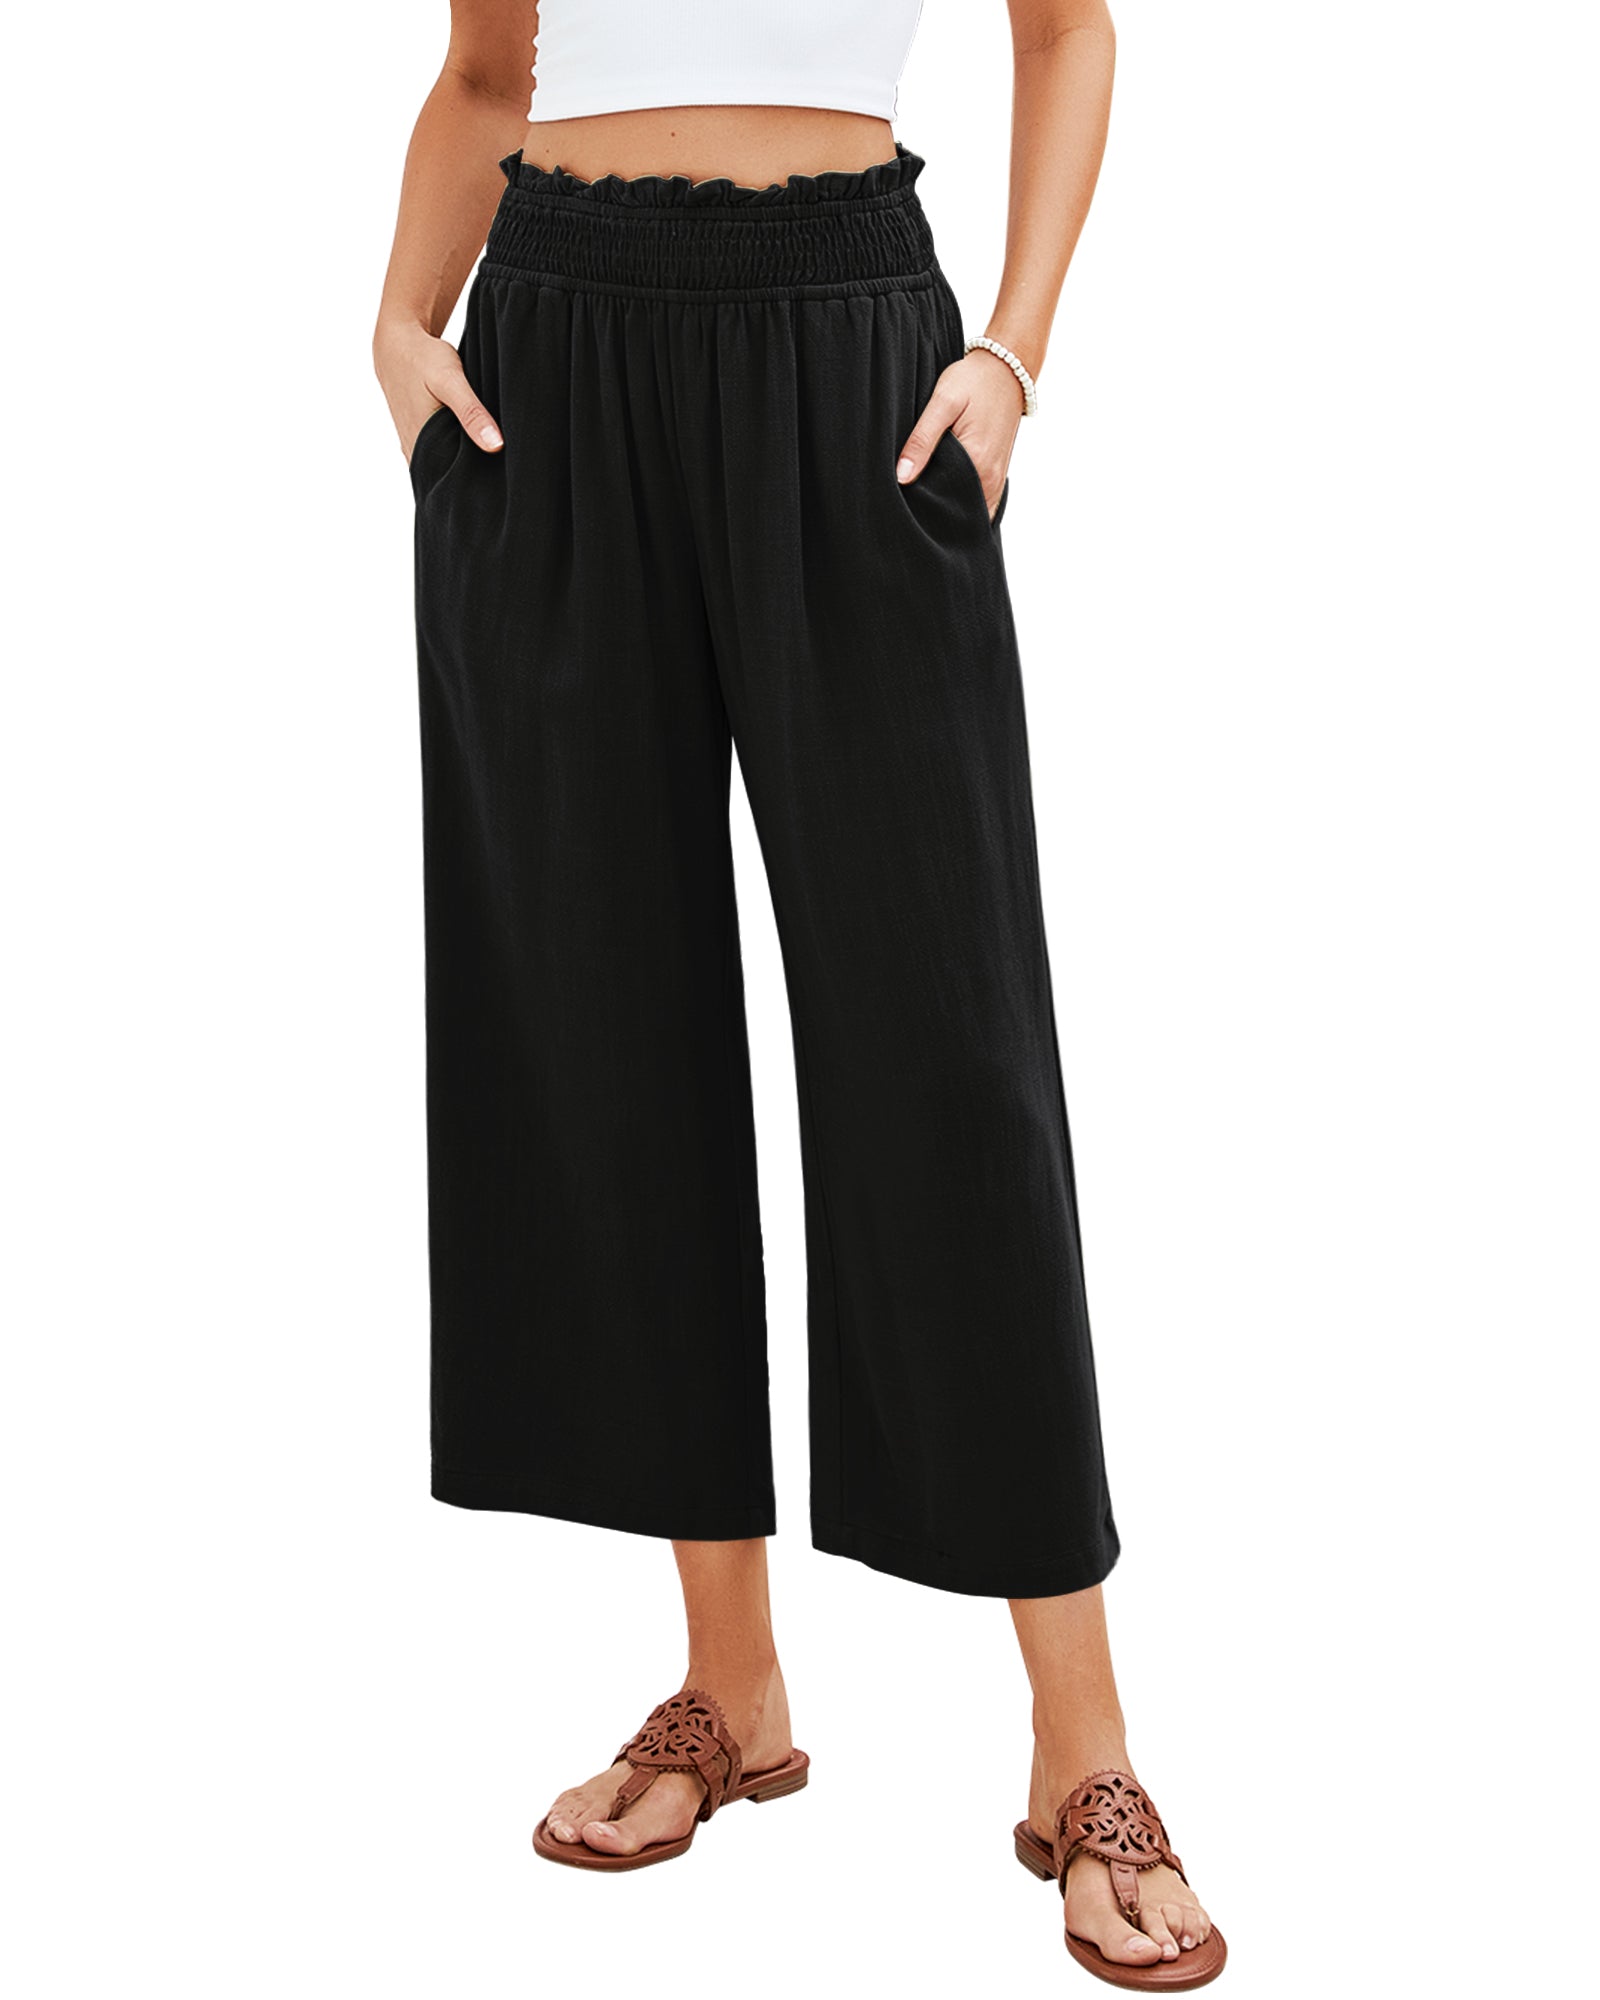 Capri Pants for Women High Waisted Linen Cotton Casual Loose Flowy Pants  Lightweight Relaxed Fit Capris with Pockets